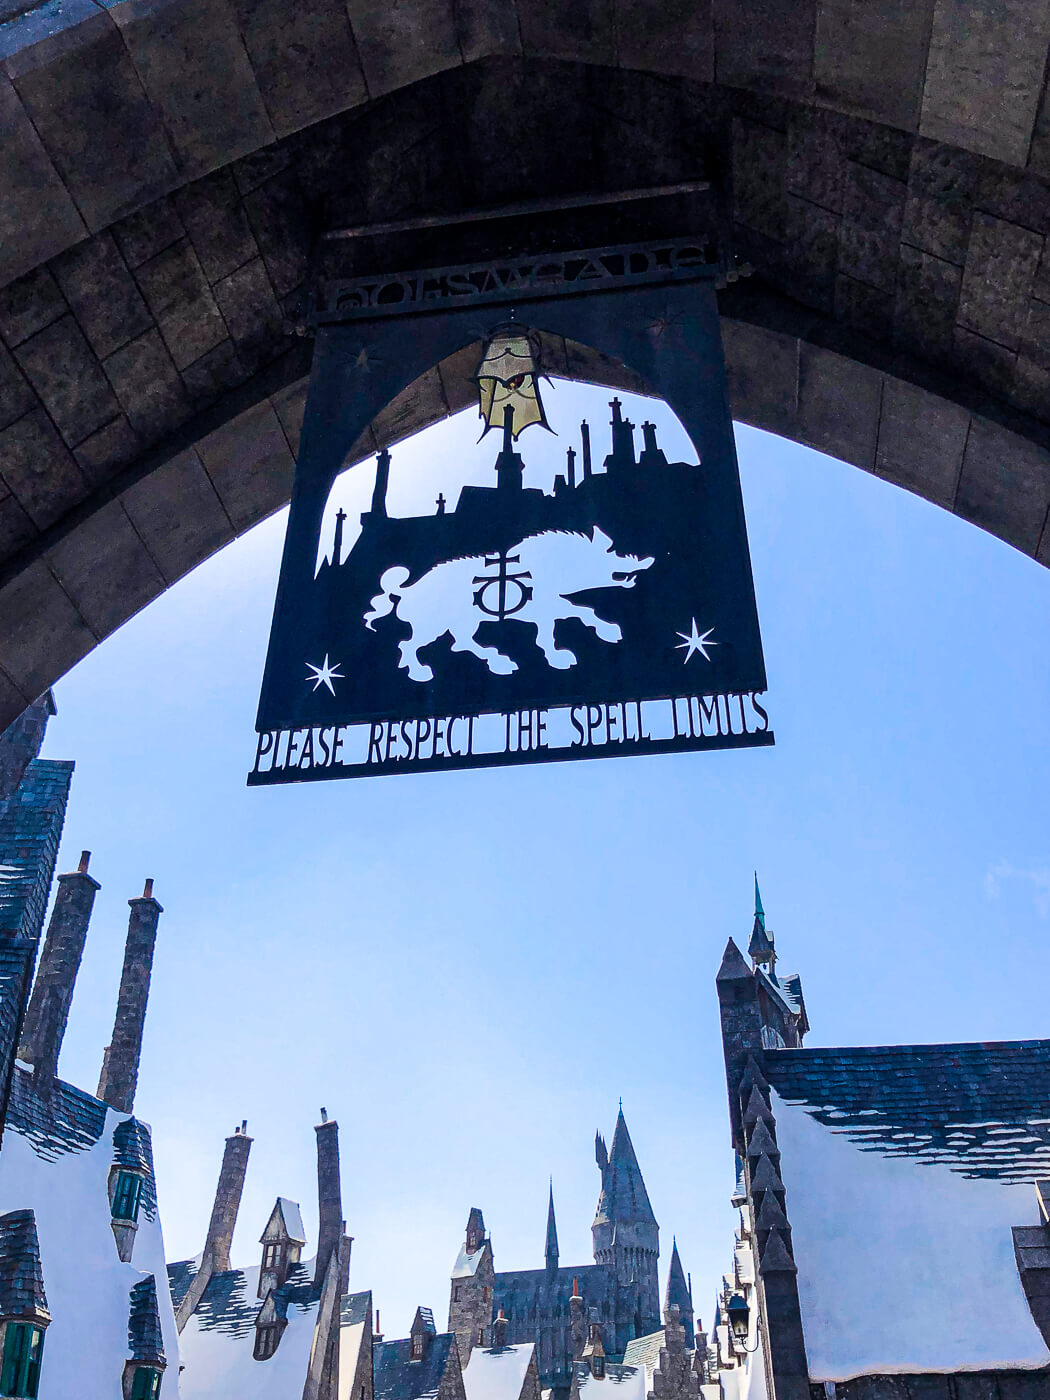 The stone entrance to The Wizarding World of Harry Potter™ at Universal Studios. A hogwarts sign says "please respect the spell limits." Snow capped building are seen in the background. 